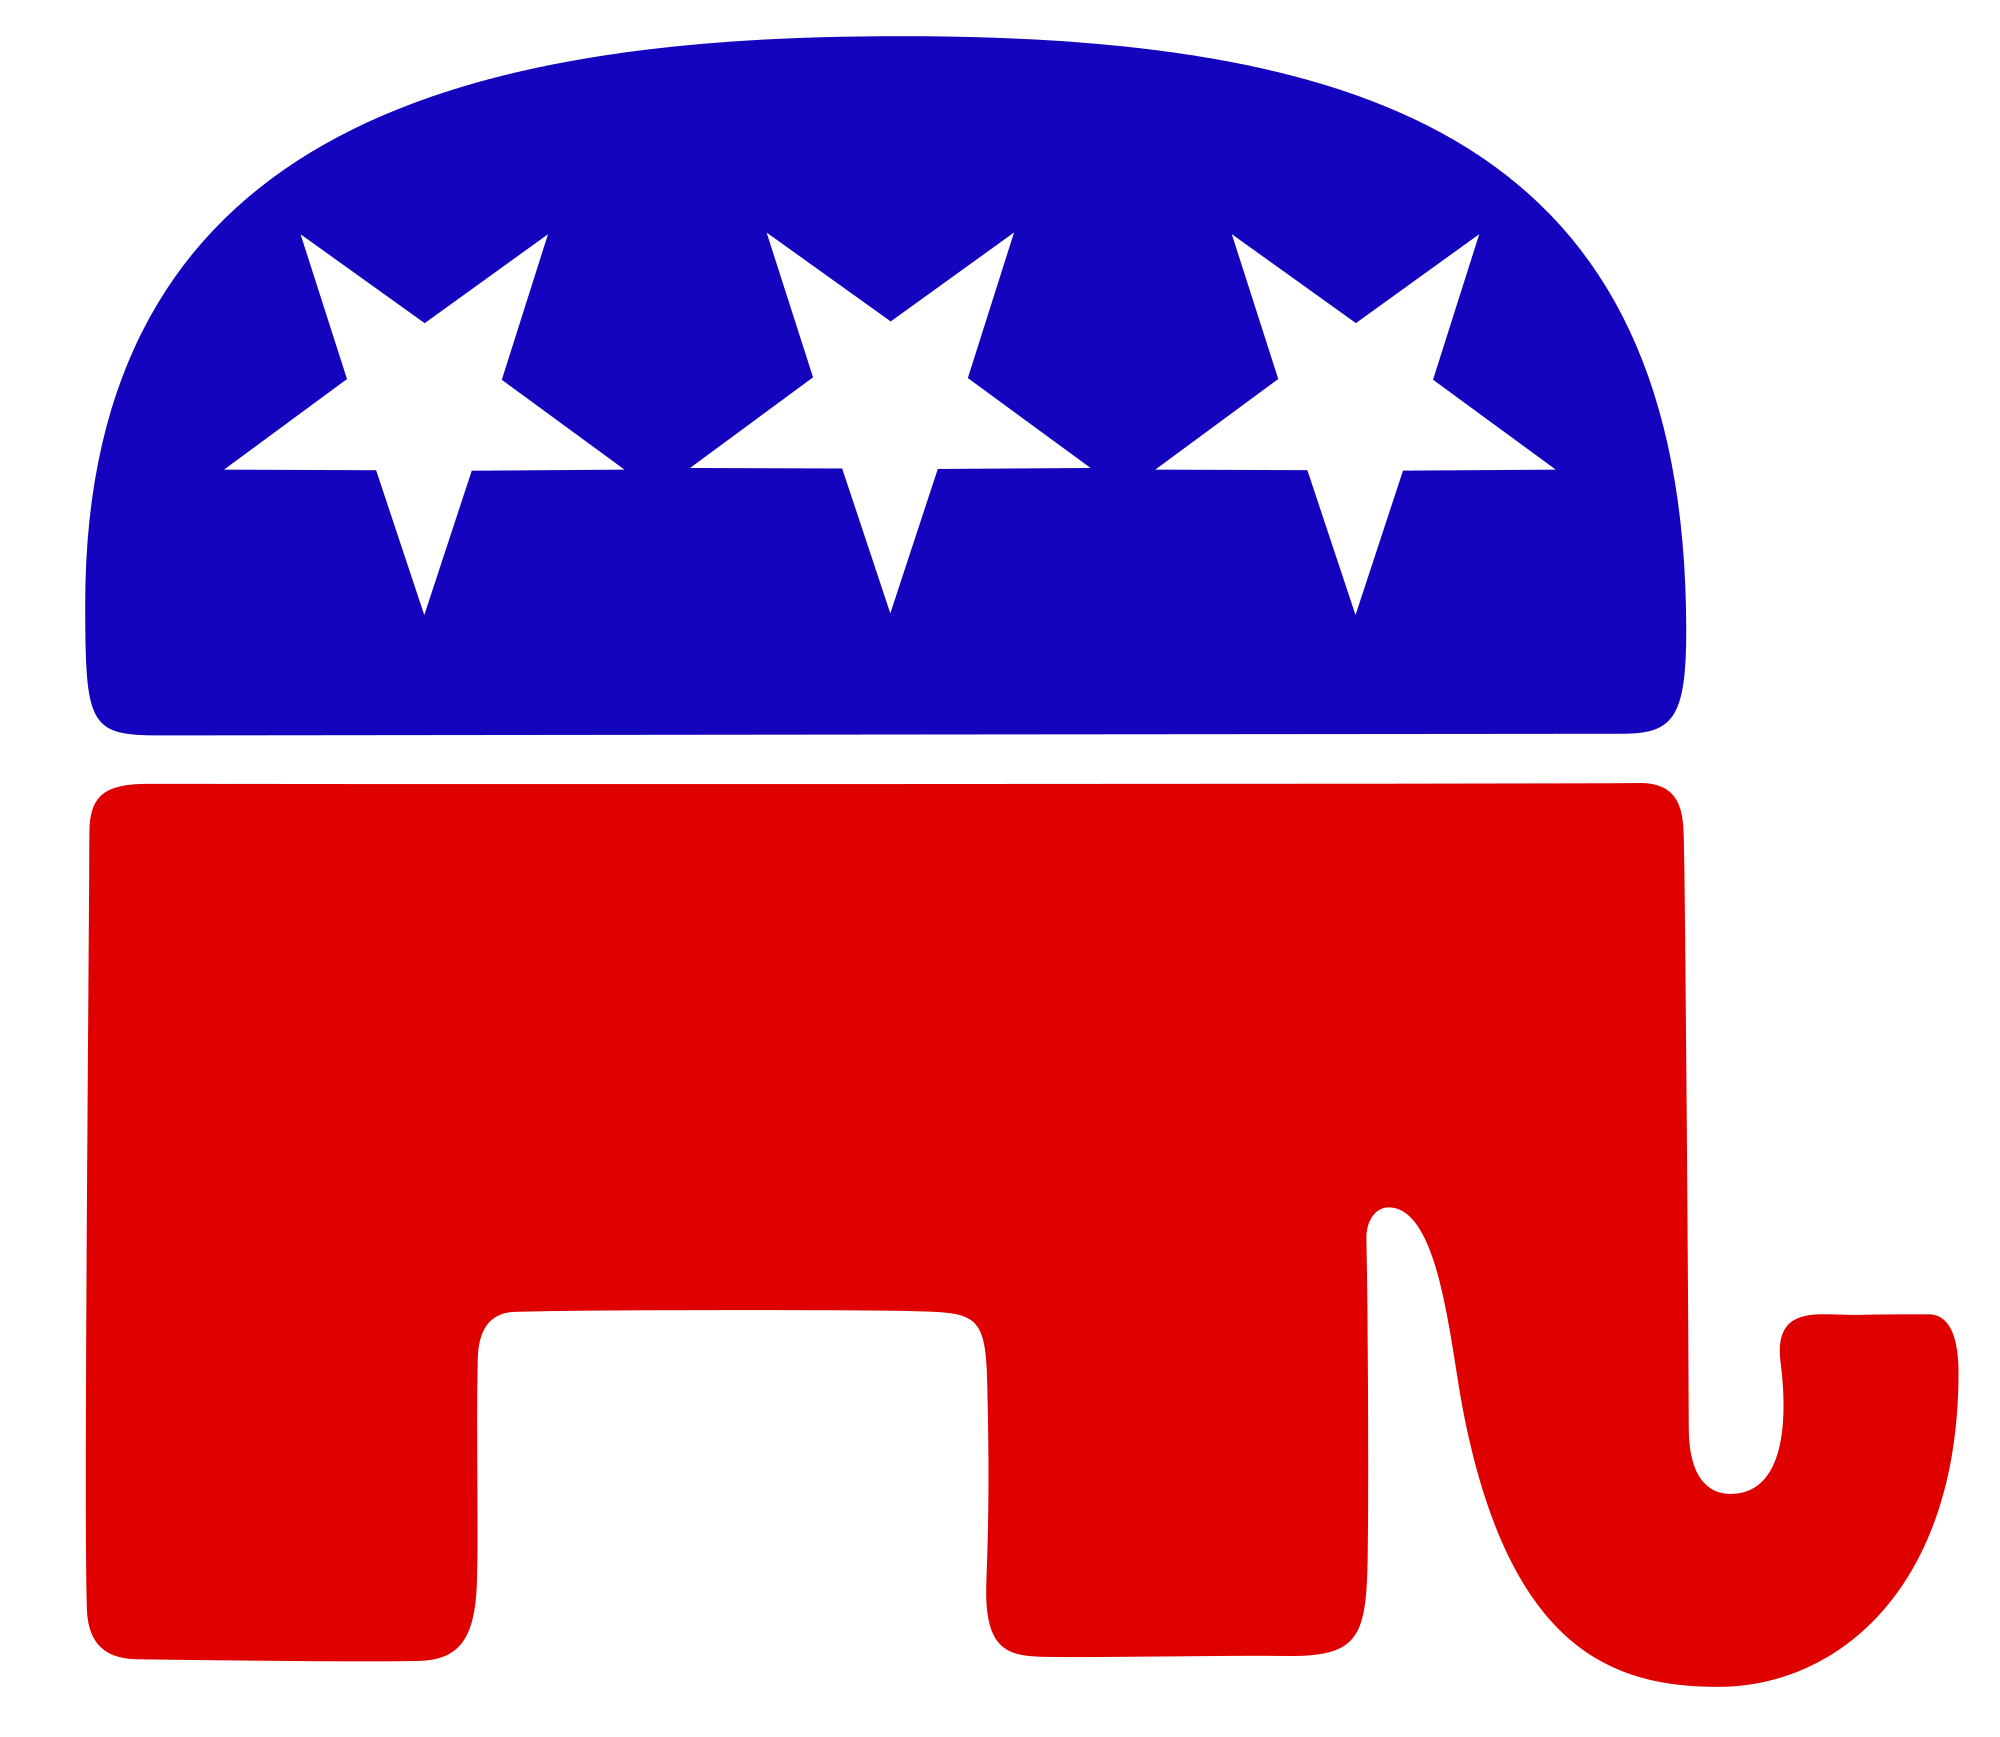 Republican Party – History, Economic and Immigration Policy